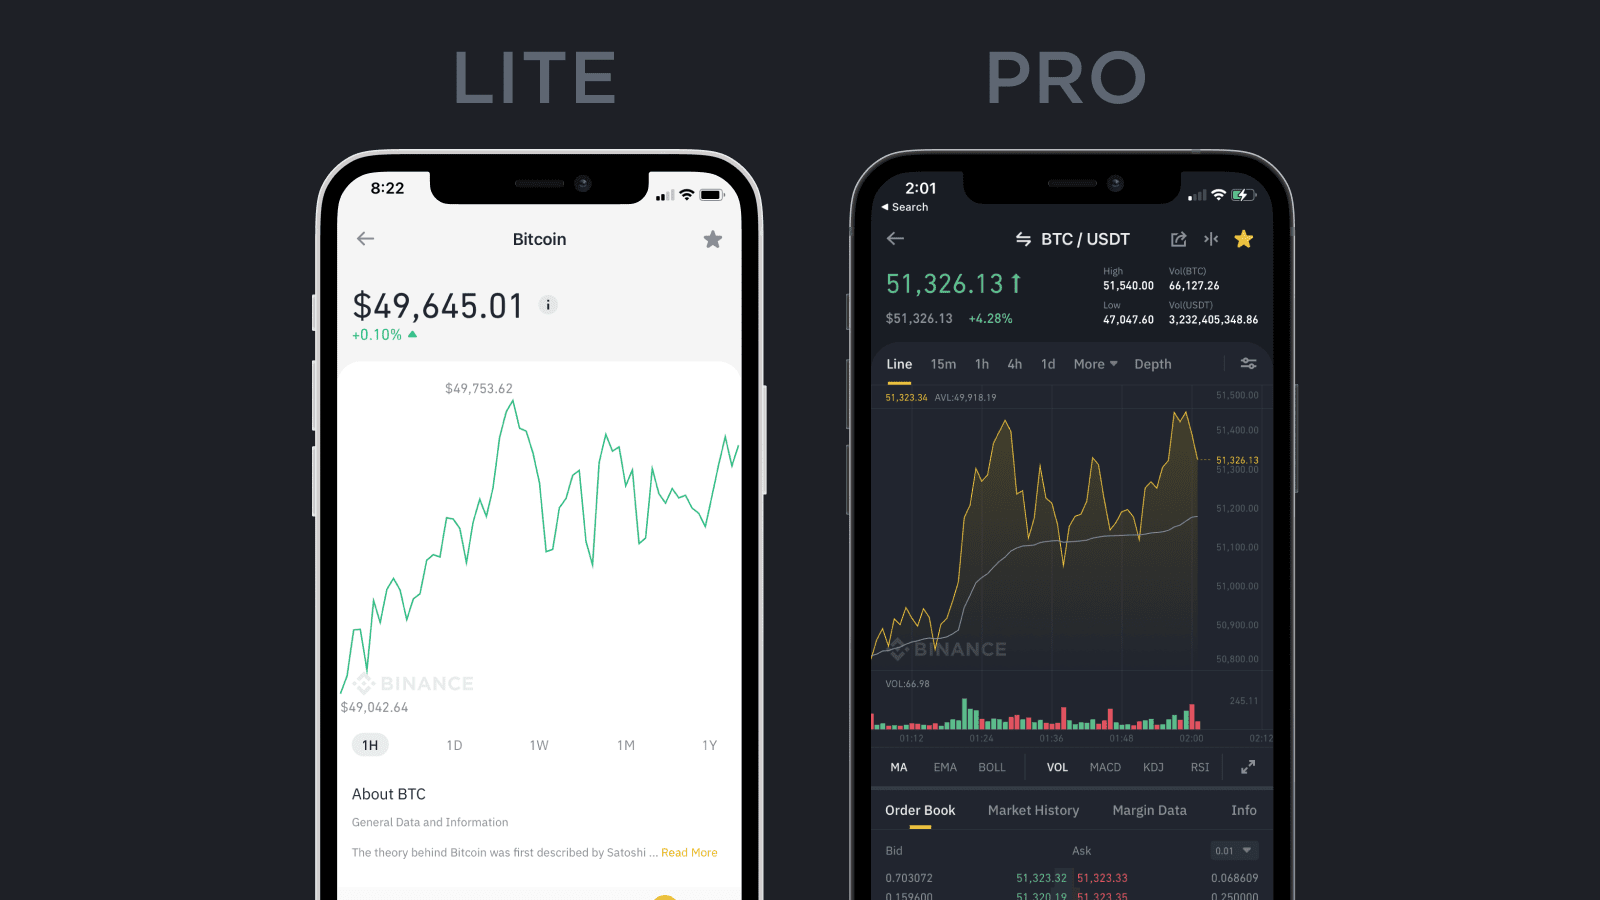 Binance Lite vs Professional: Which Mode Is Right For You?